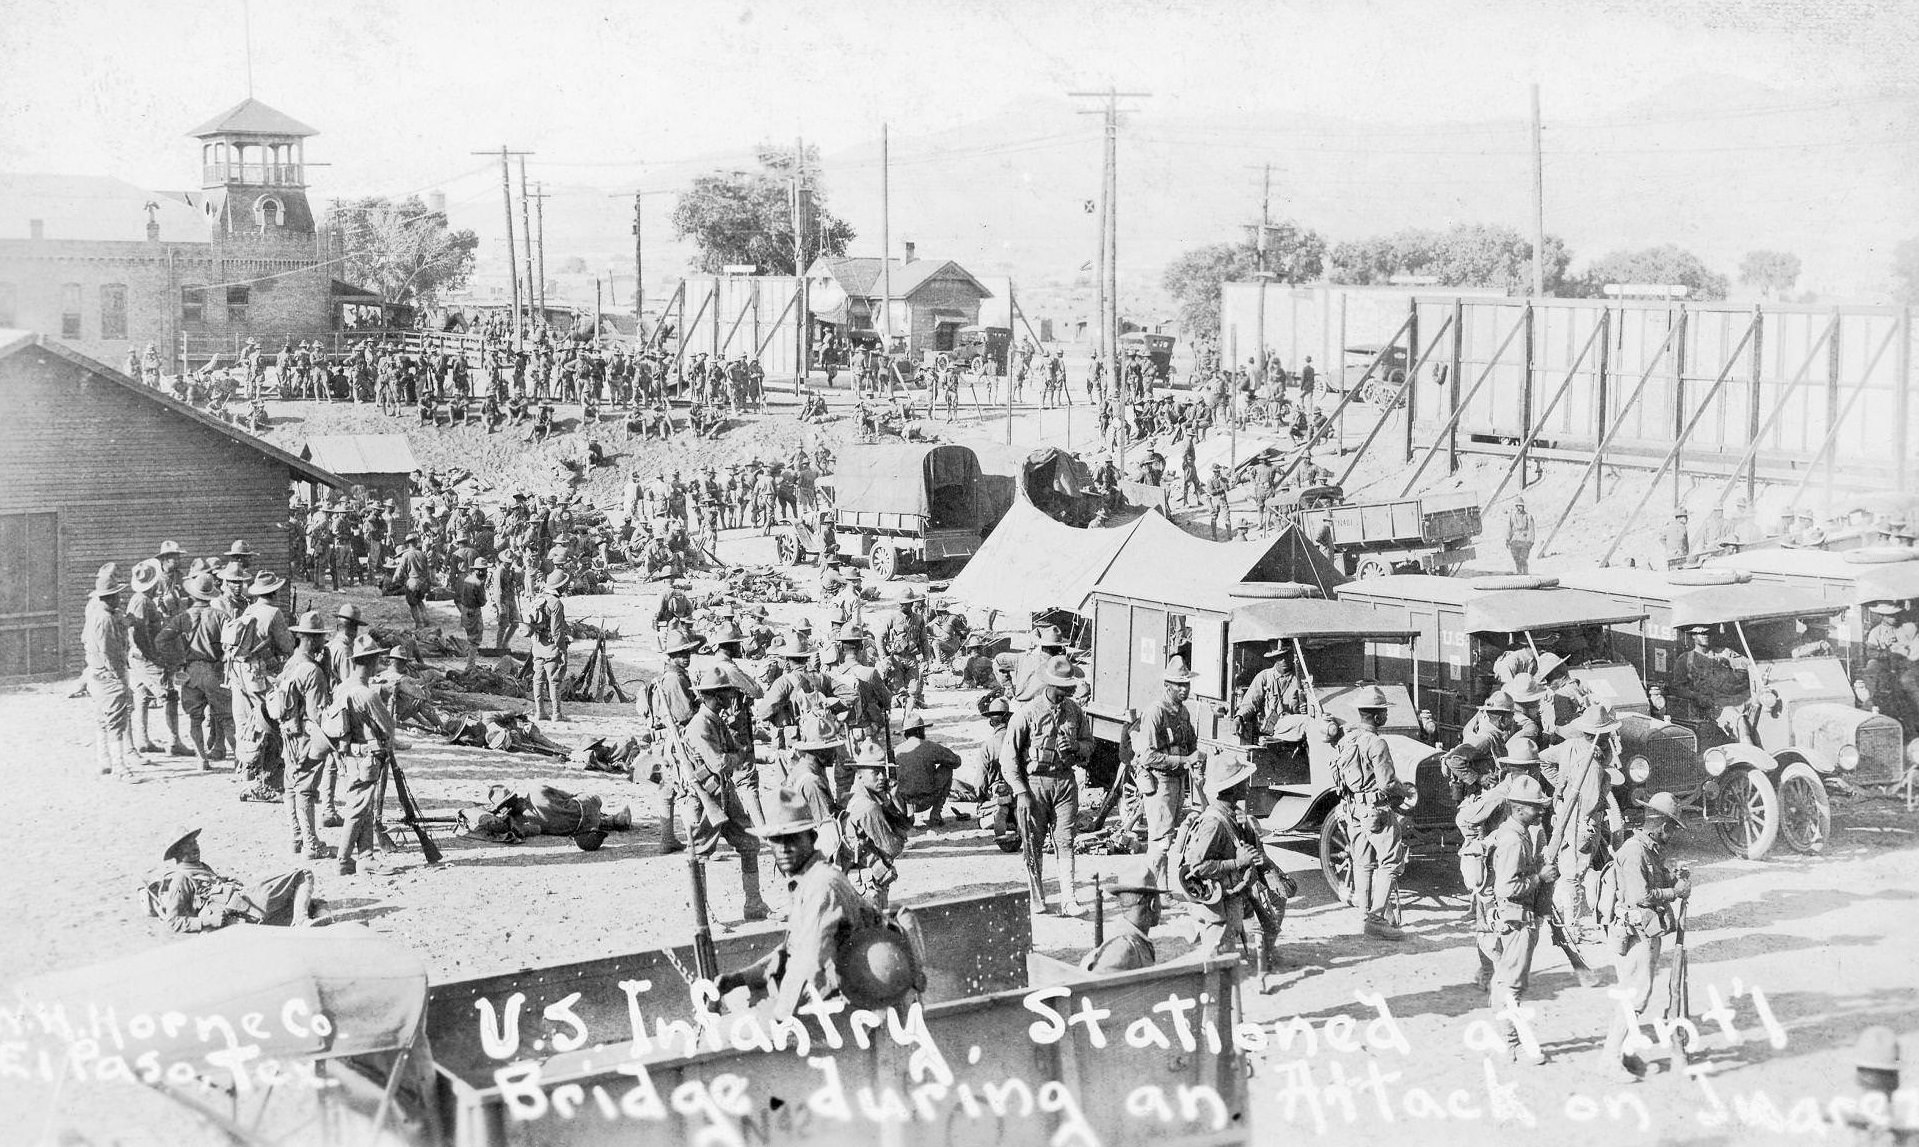 Group shot of many African American members of the United States Infantry, outside and among tents, buildings, and equipment, at the International Bridge in El Paso, 1900s